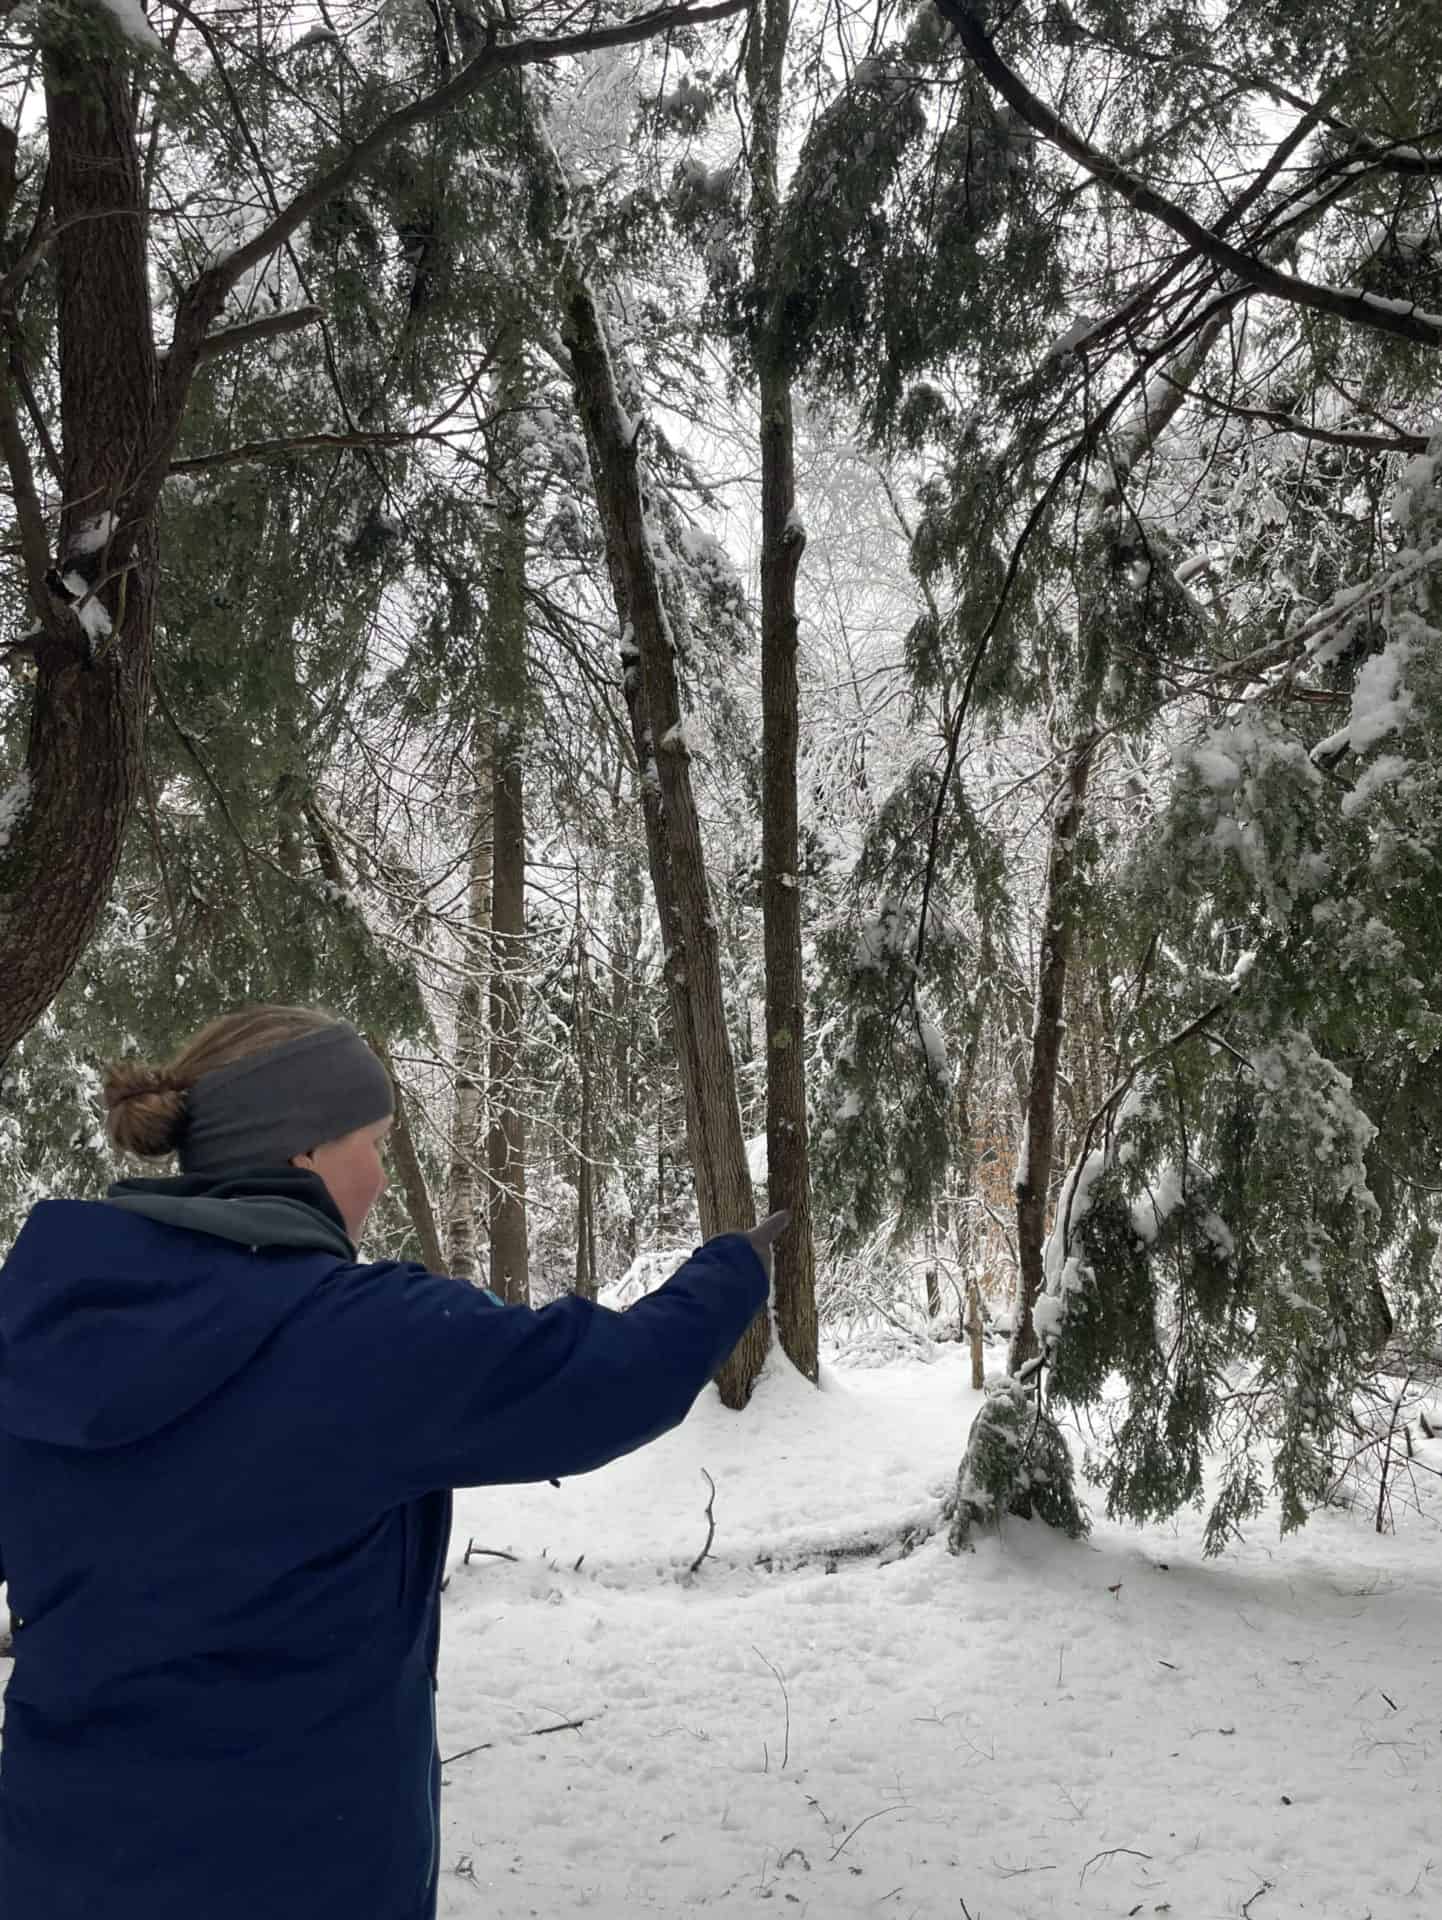 Aimee Gelinas snows the needles of hemlock trees in the boreal forest at Tamarack Hollow.